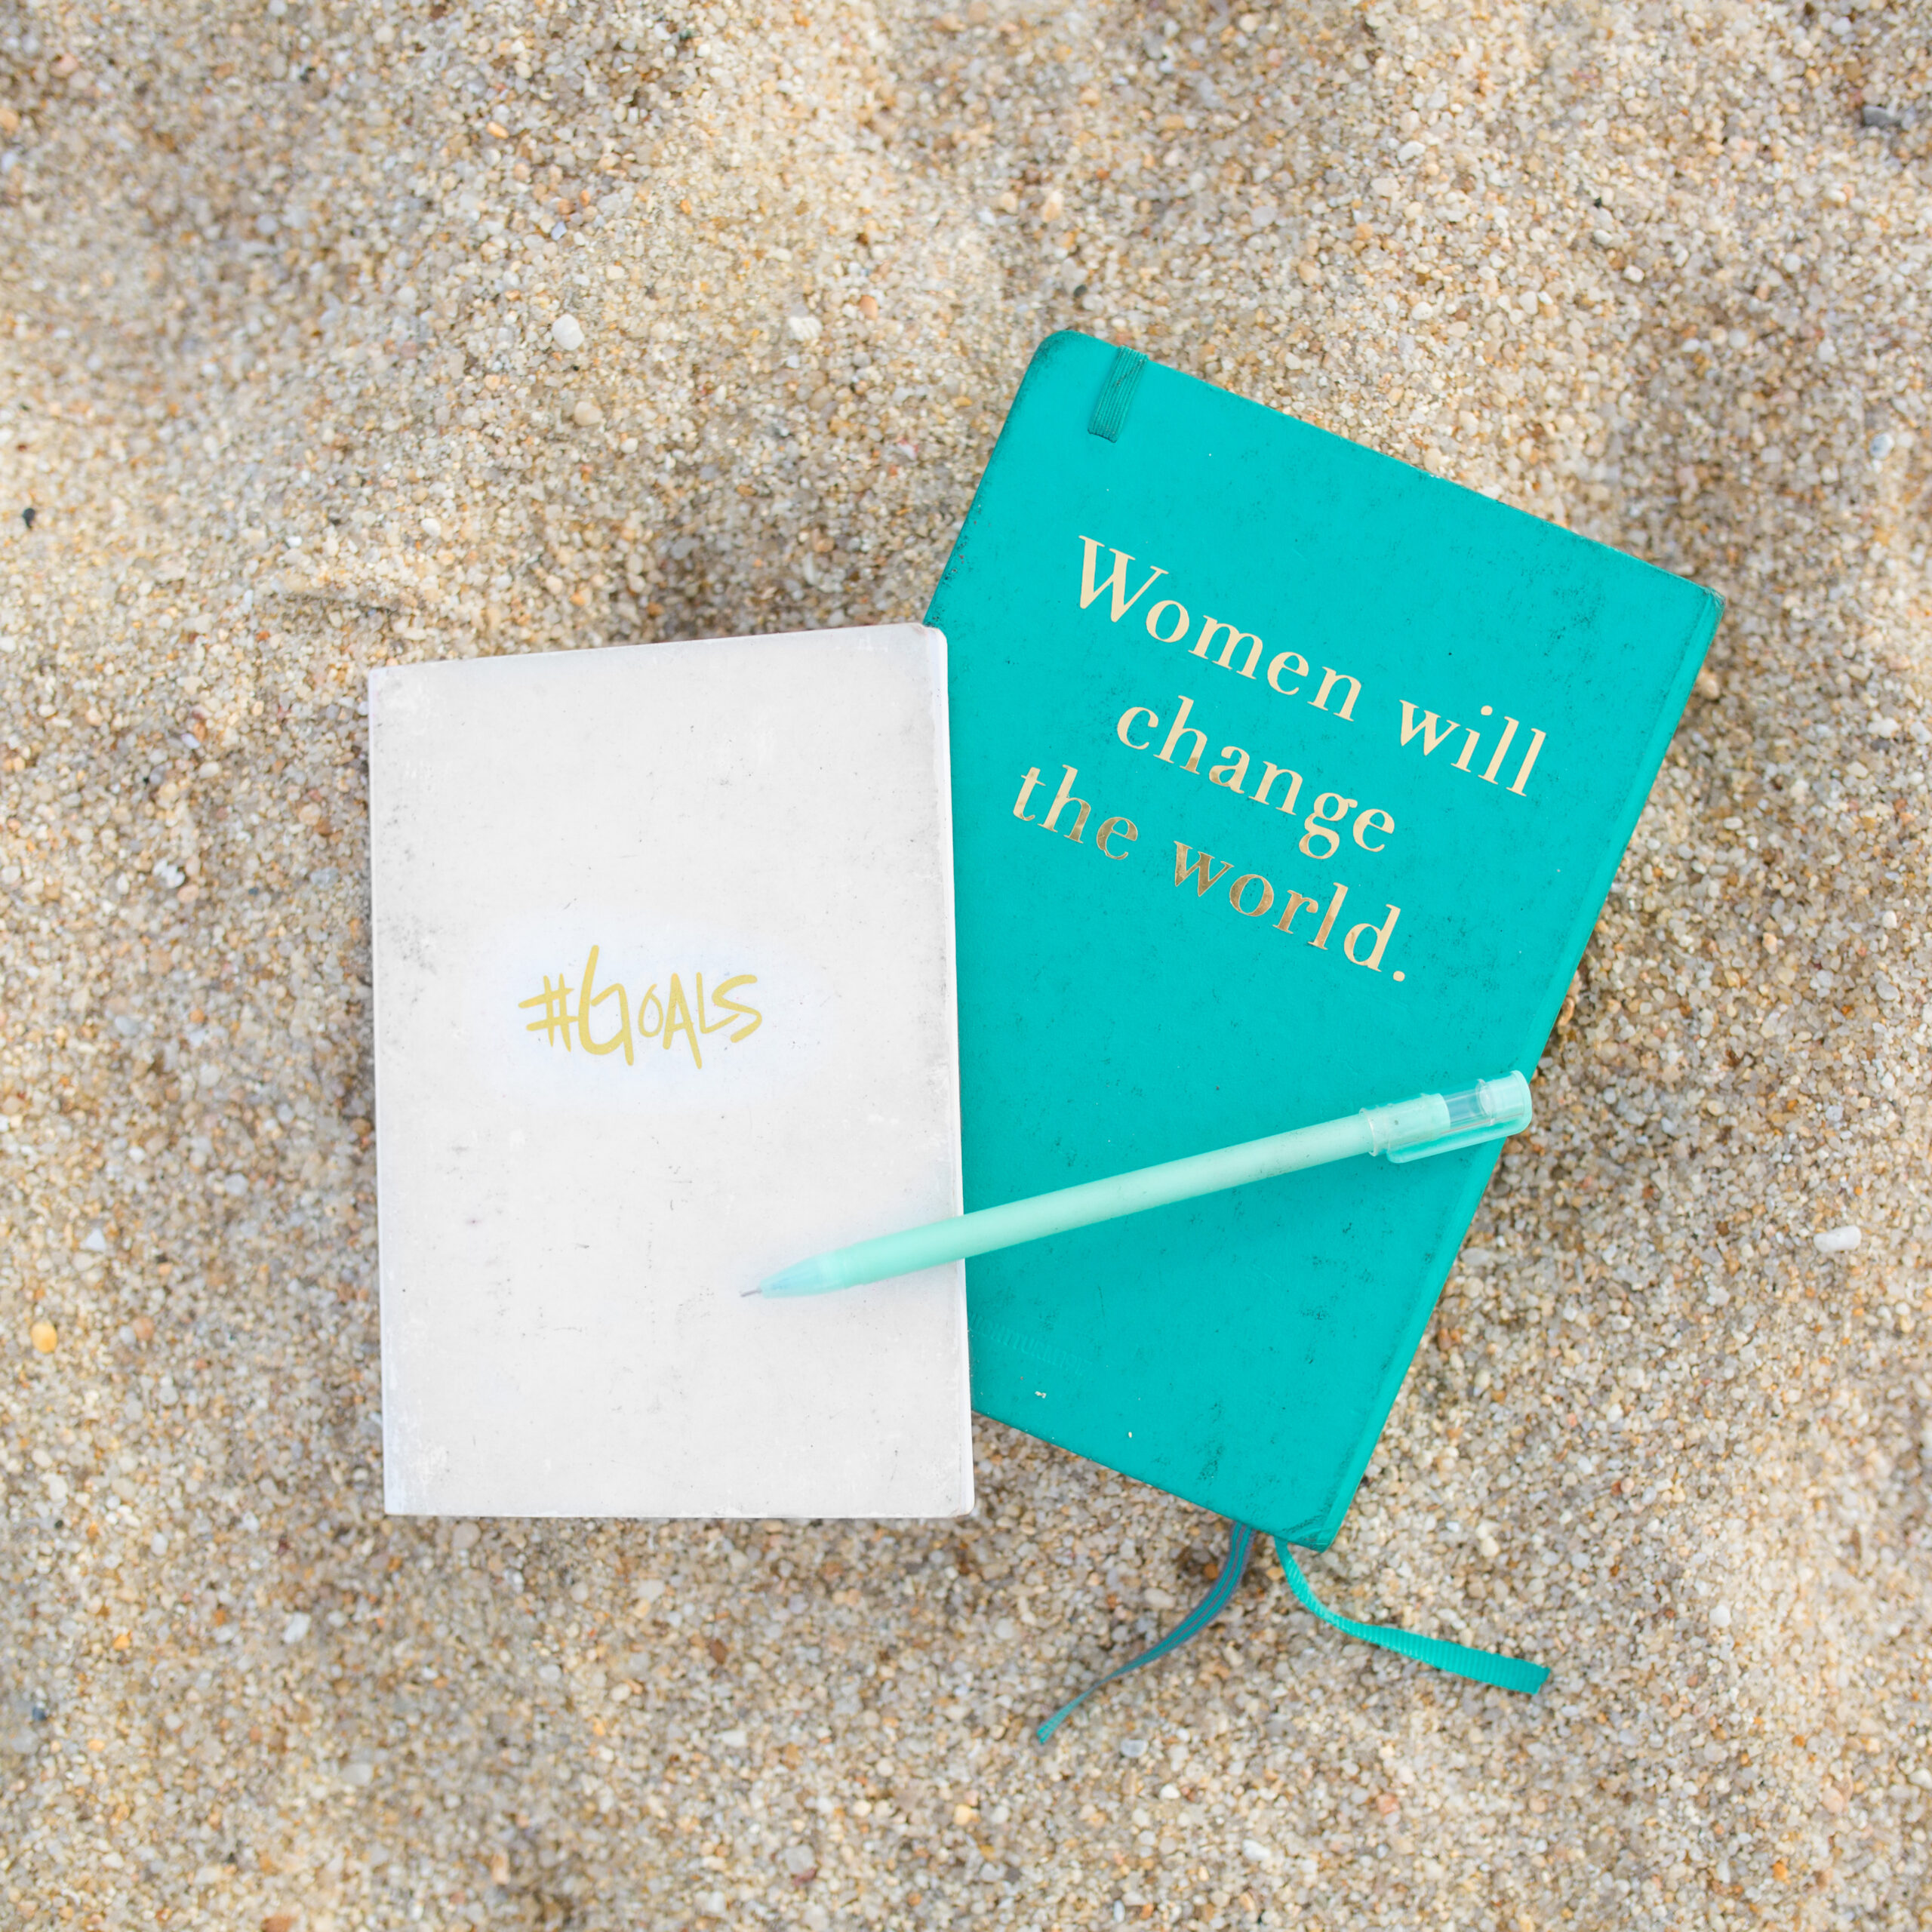 2 notebooks on the beach - women will change the world and #goals Hack Your habits